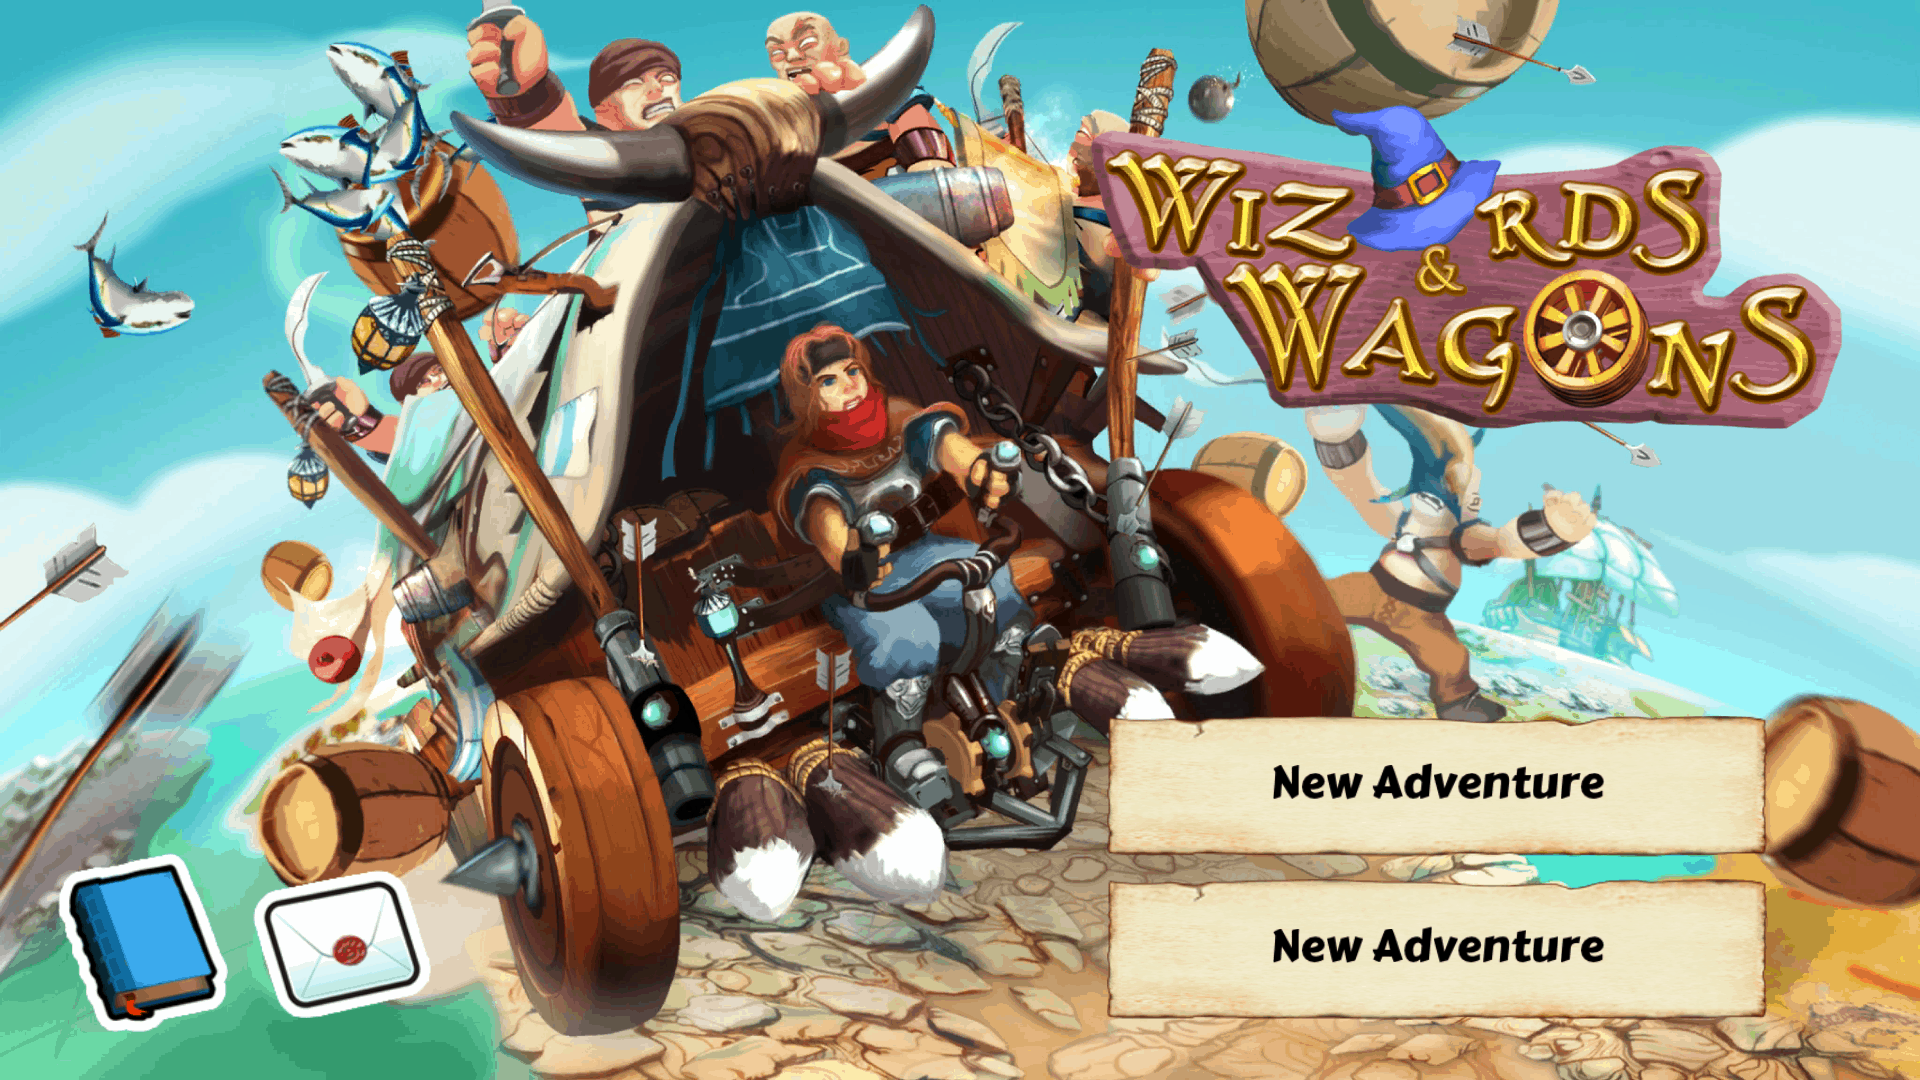 Review: Wizards and Wagons – A Mobile Fantasy Expenditure